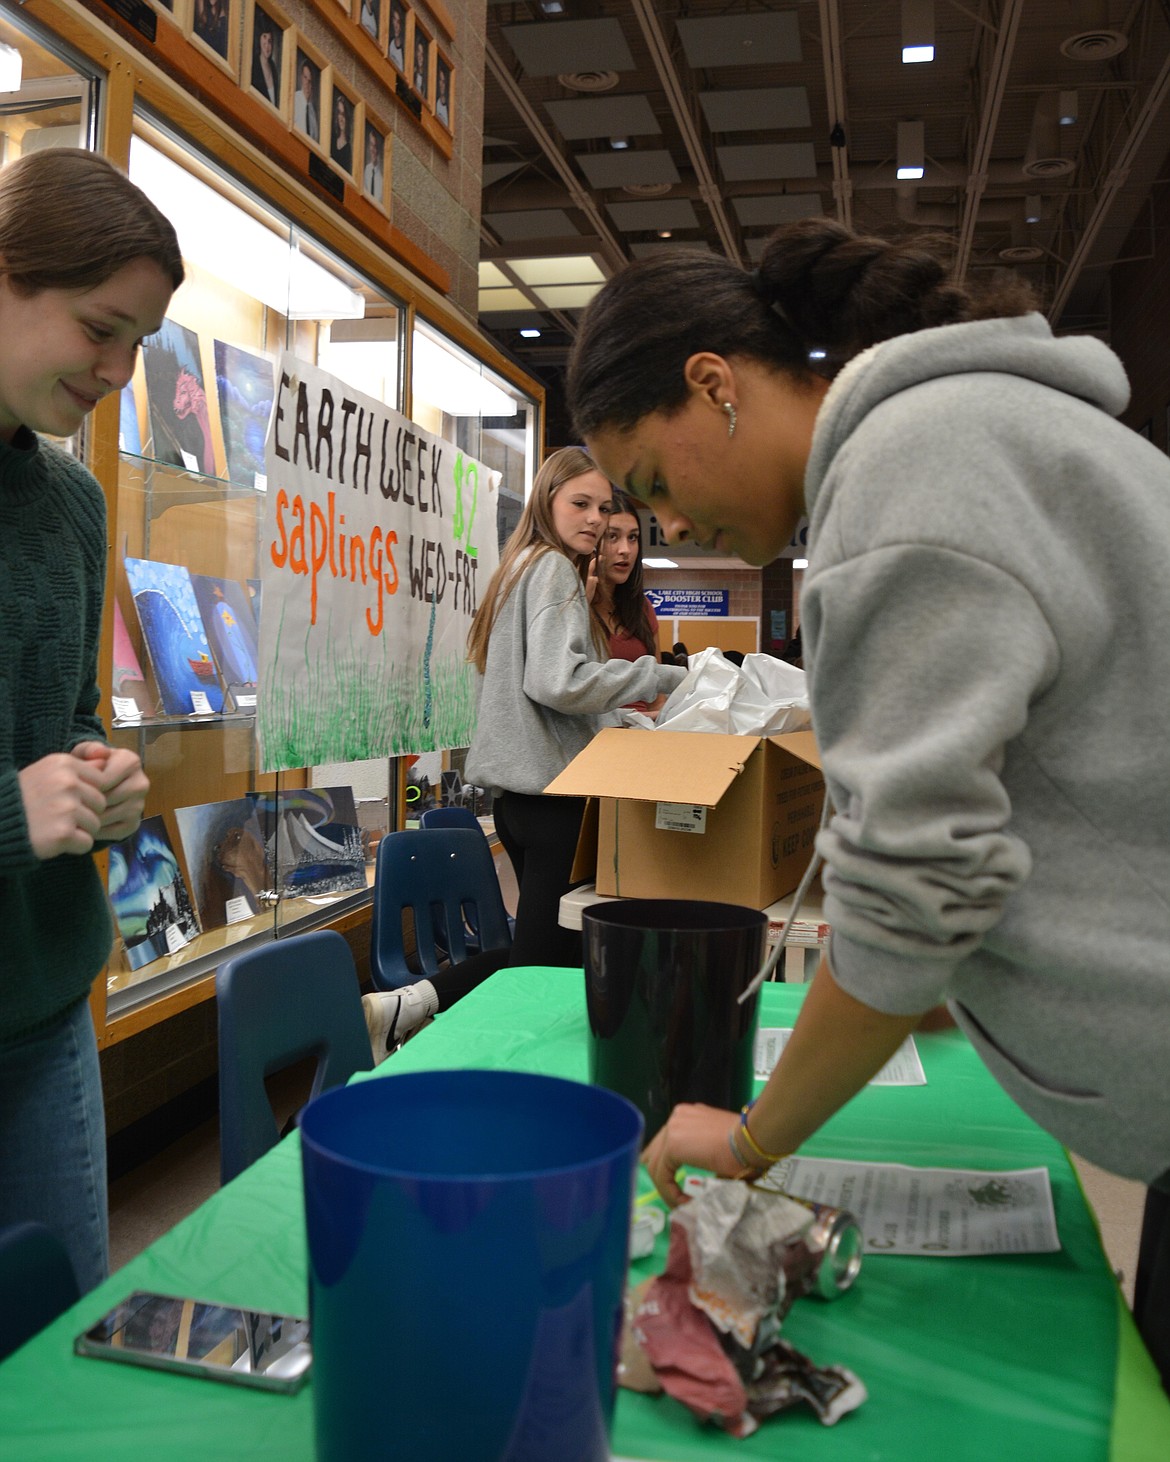 At the Lake City High School ecological club table, Gracie Ford watches as Nicole Ahrenholz demonstrates the timed recycling game the group came up with. Students have to sort through and identify which items are trash and which are recycling items in 10 seconds. If they get everything right, they receive a candy prize.